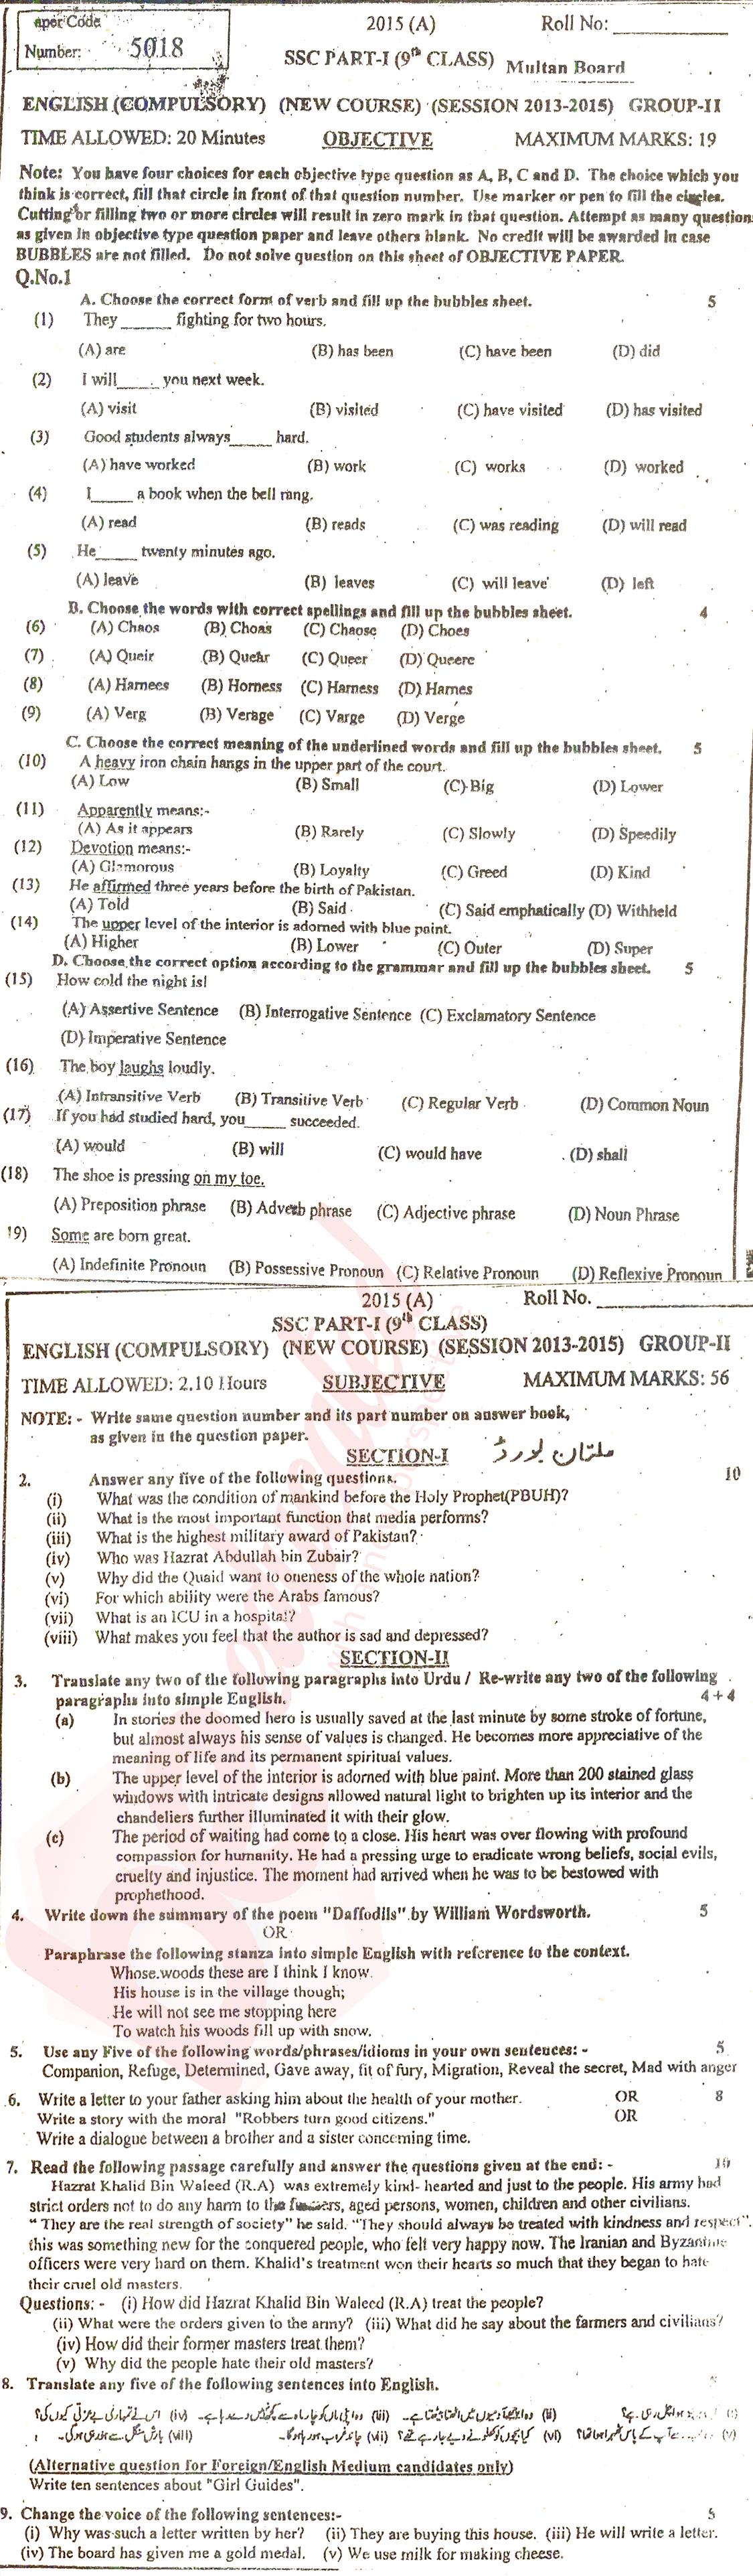 English 9th class Past Paper Group 2 BISE Multan 2015